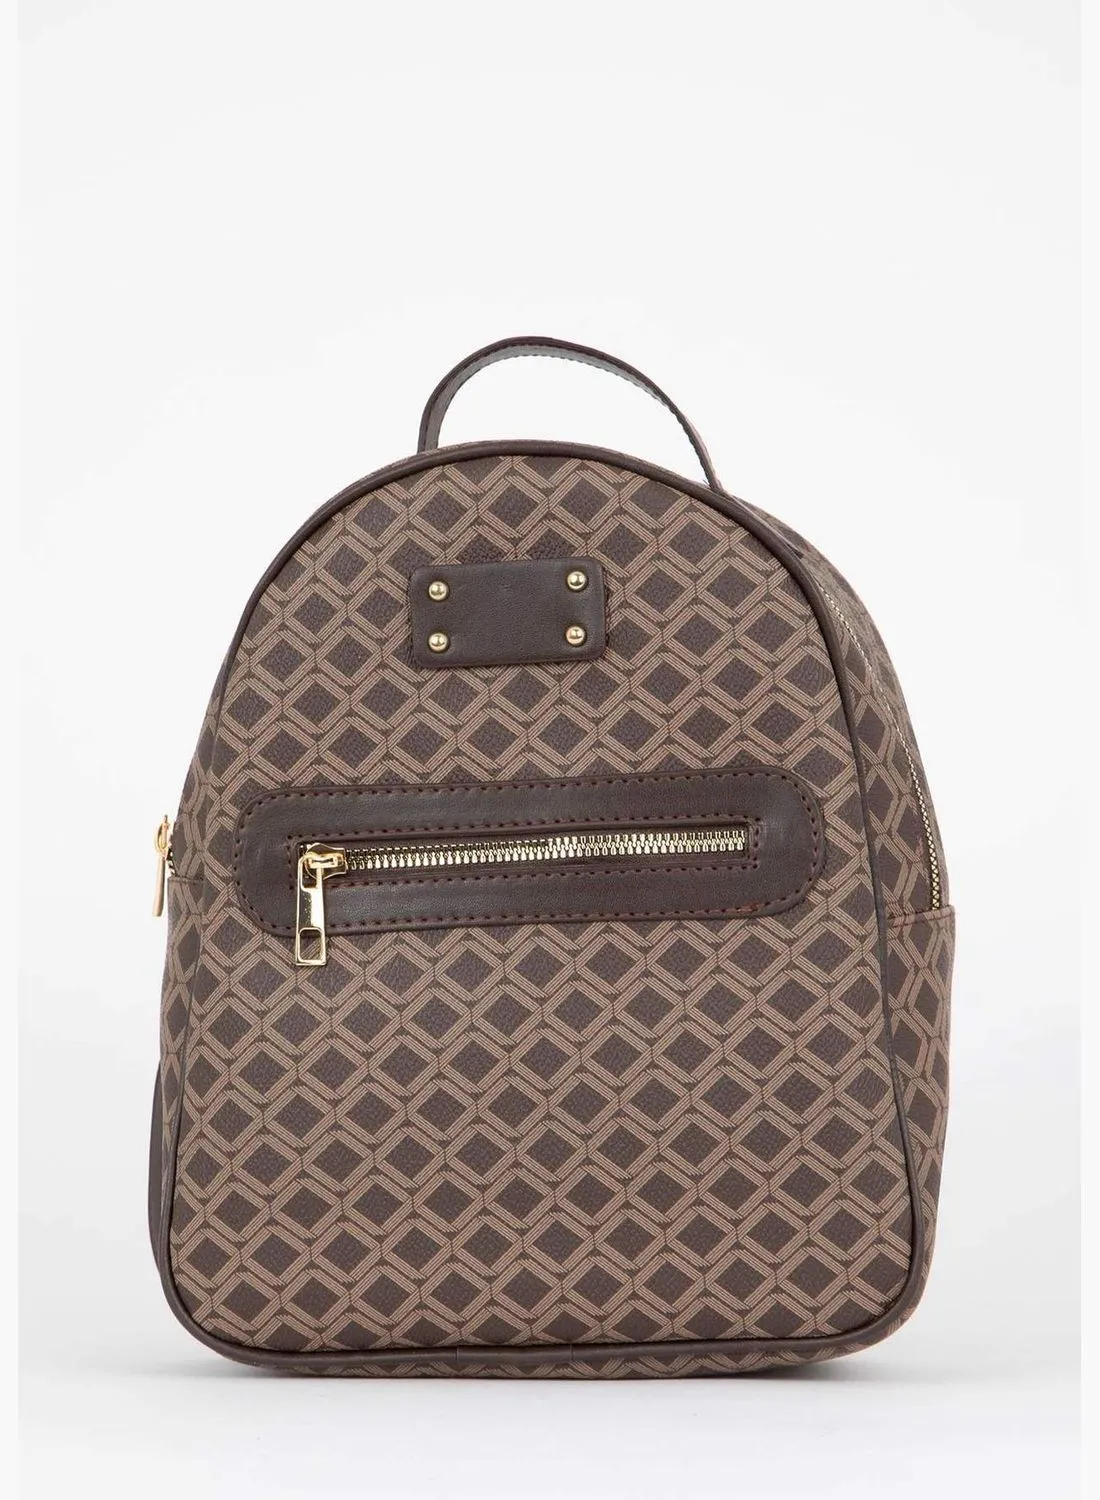 DeFacto Faux Leather Printed Backpack